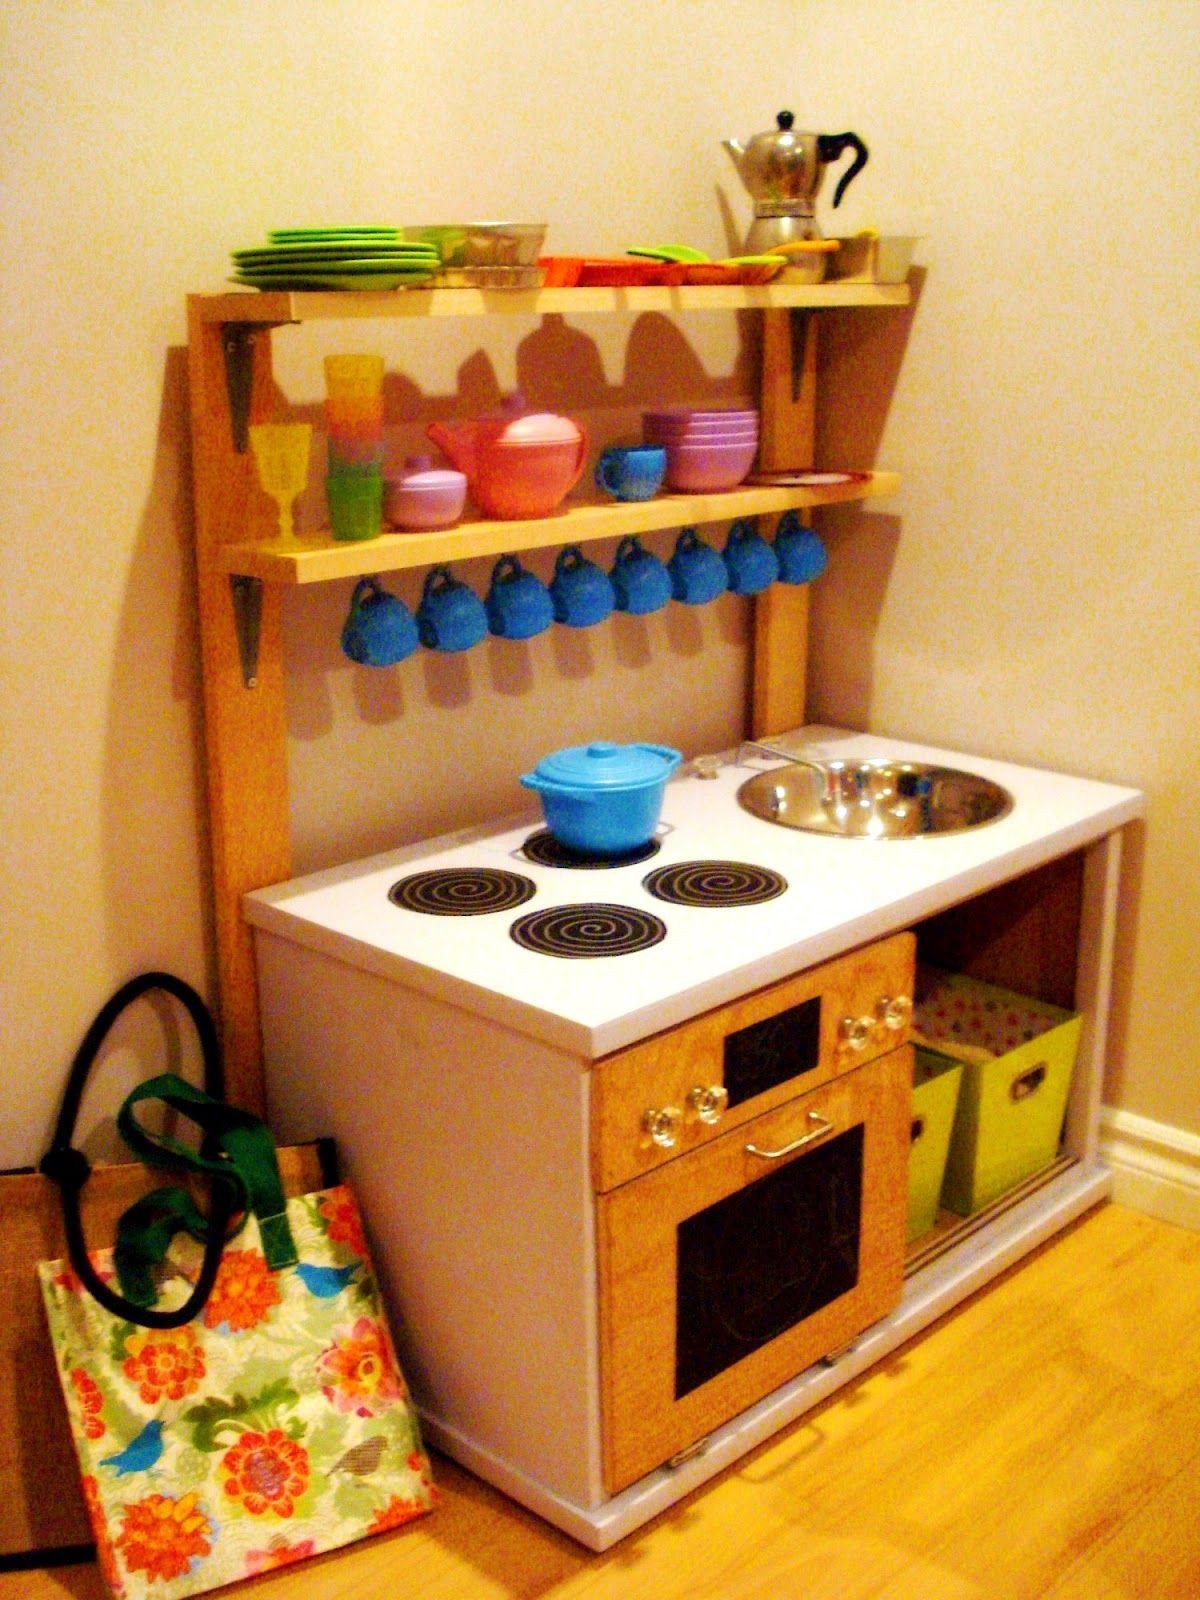 DIY Wooden Play Kitchen
 DIY play kitchen homemade toy kitchen copyright yearling